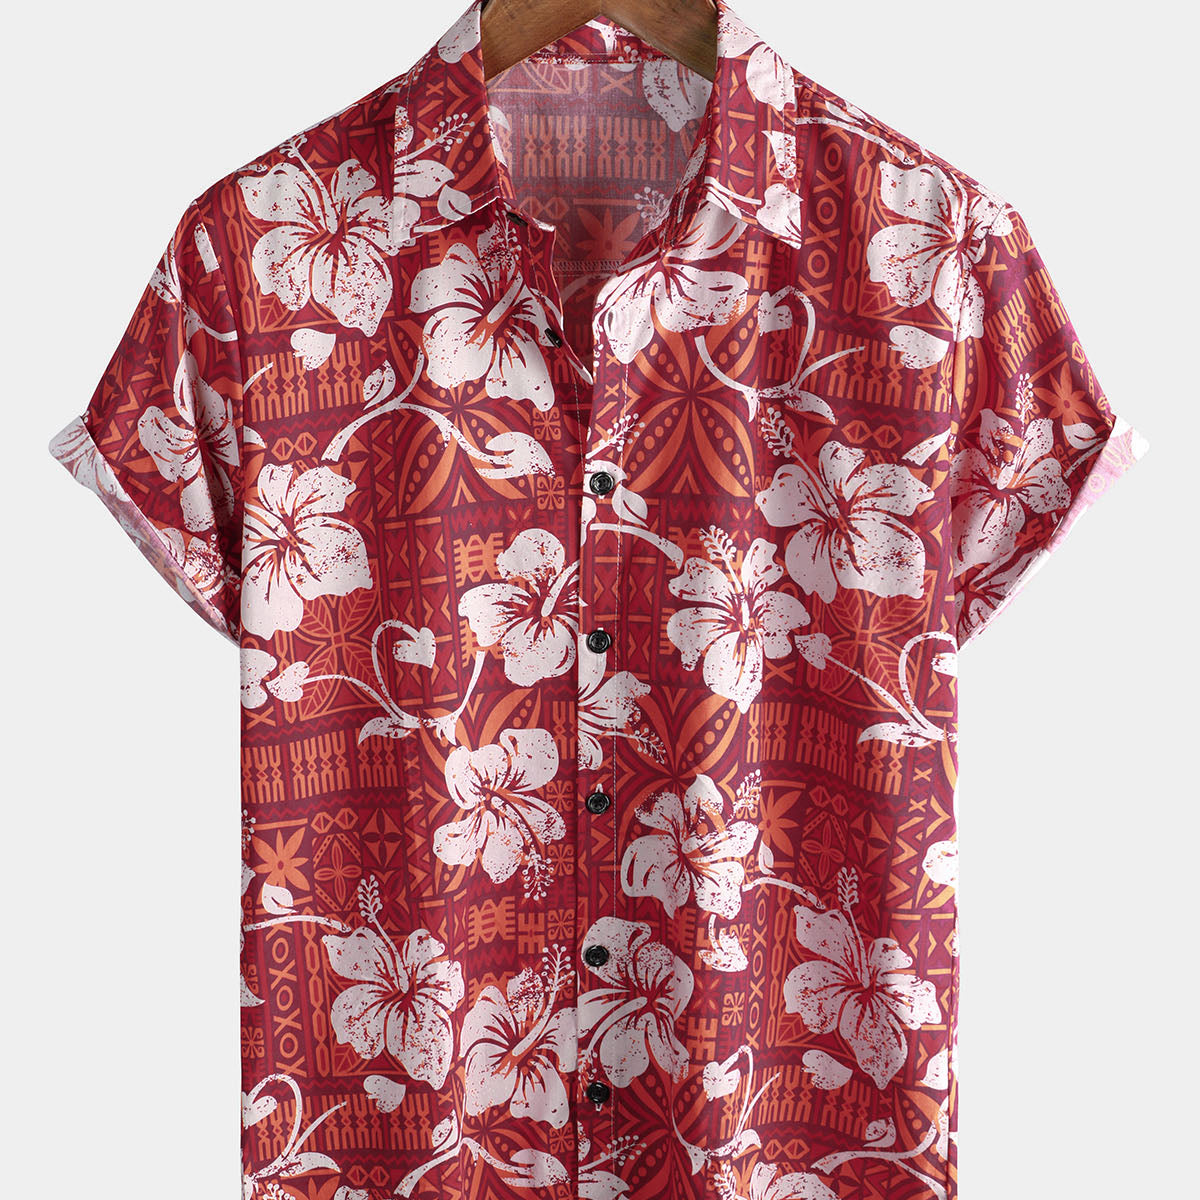 Men's Red Hawaiian Vintage Floral Hibiscus Print Summer Beach Holiday Button Up Shirt